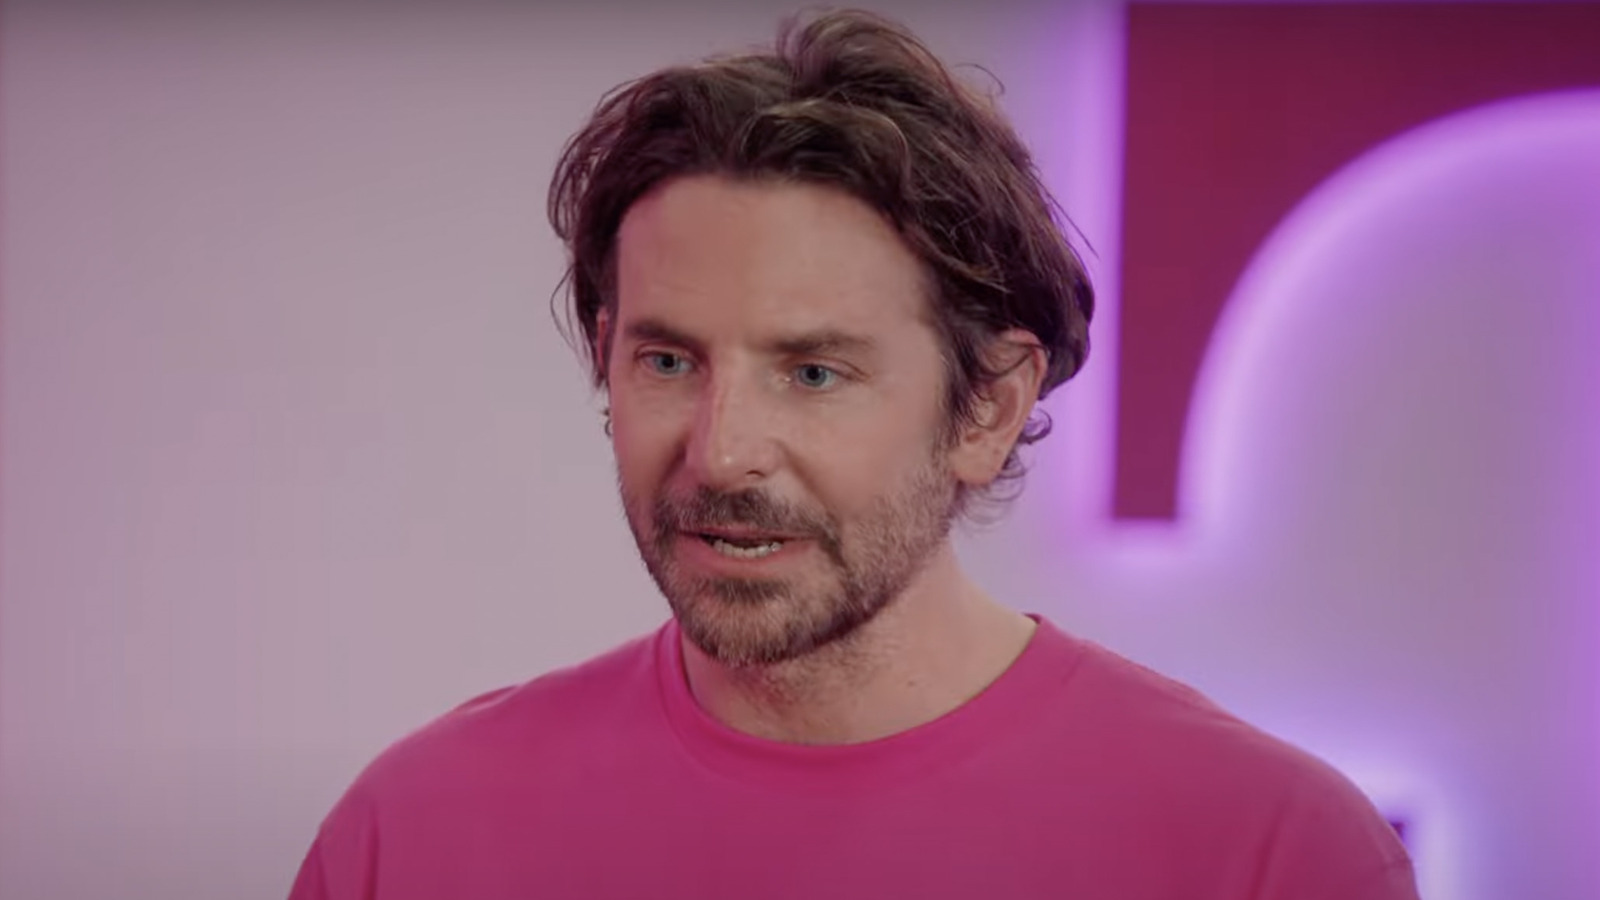 TMobile Super Bowl Ad Features Bradley Cooper With His Toughest Co